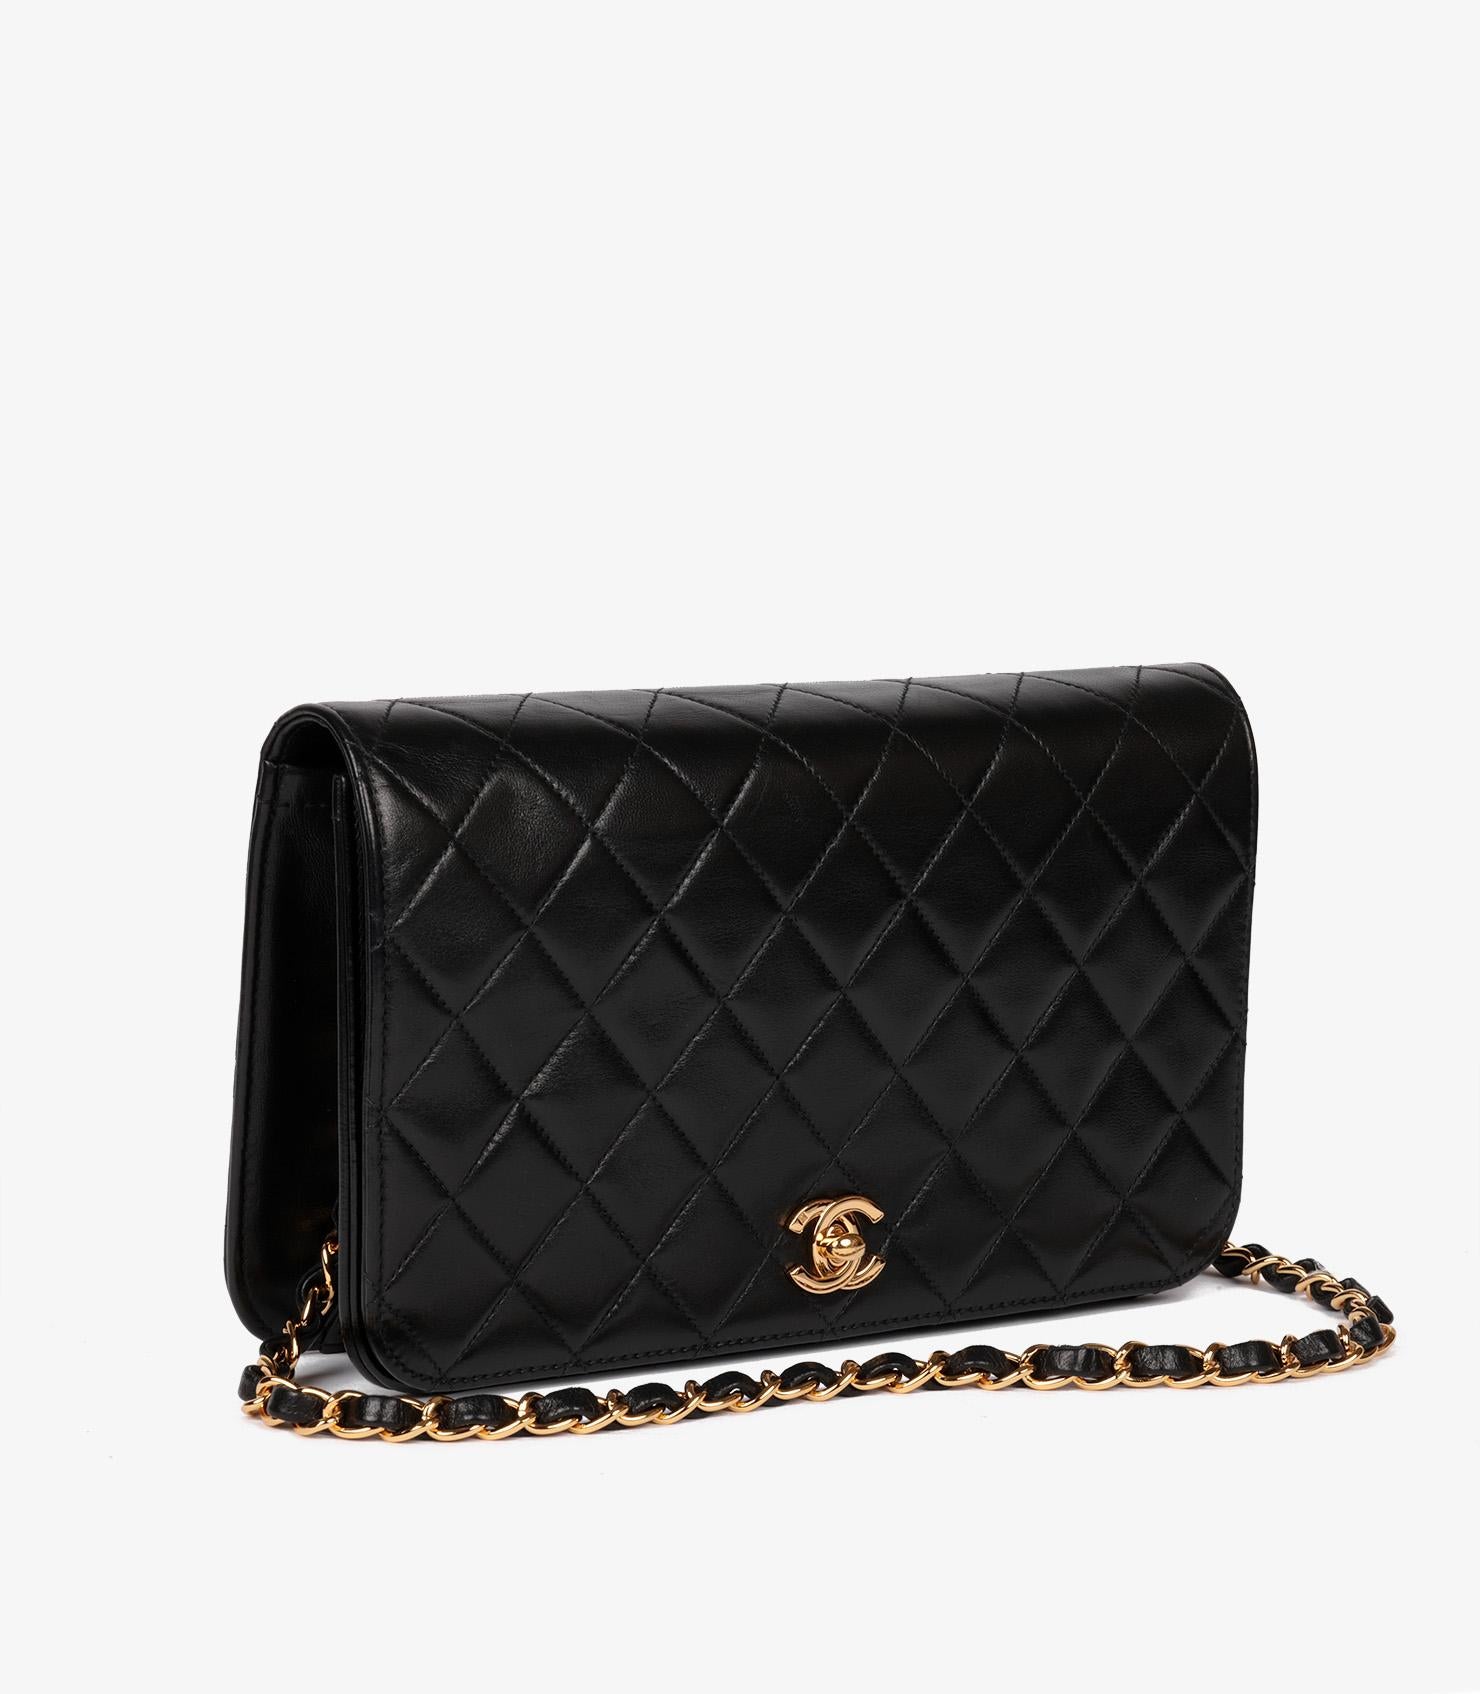 Chanel Black Quilted Lambskin Vintage Small Classic Single Full Flap Bag In Excellent Condition For Sale In Bishop's Stortford, Hertfordshire